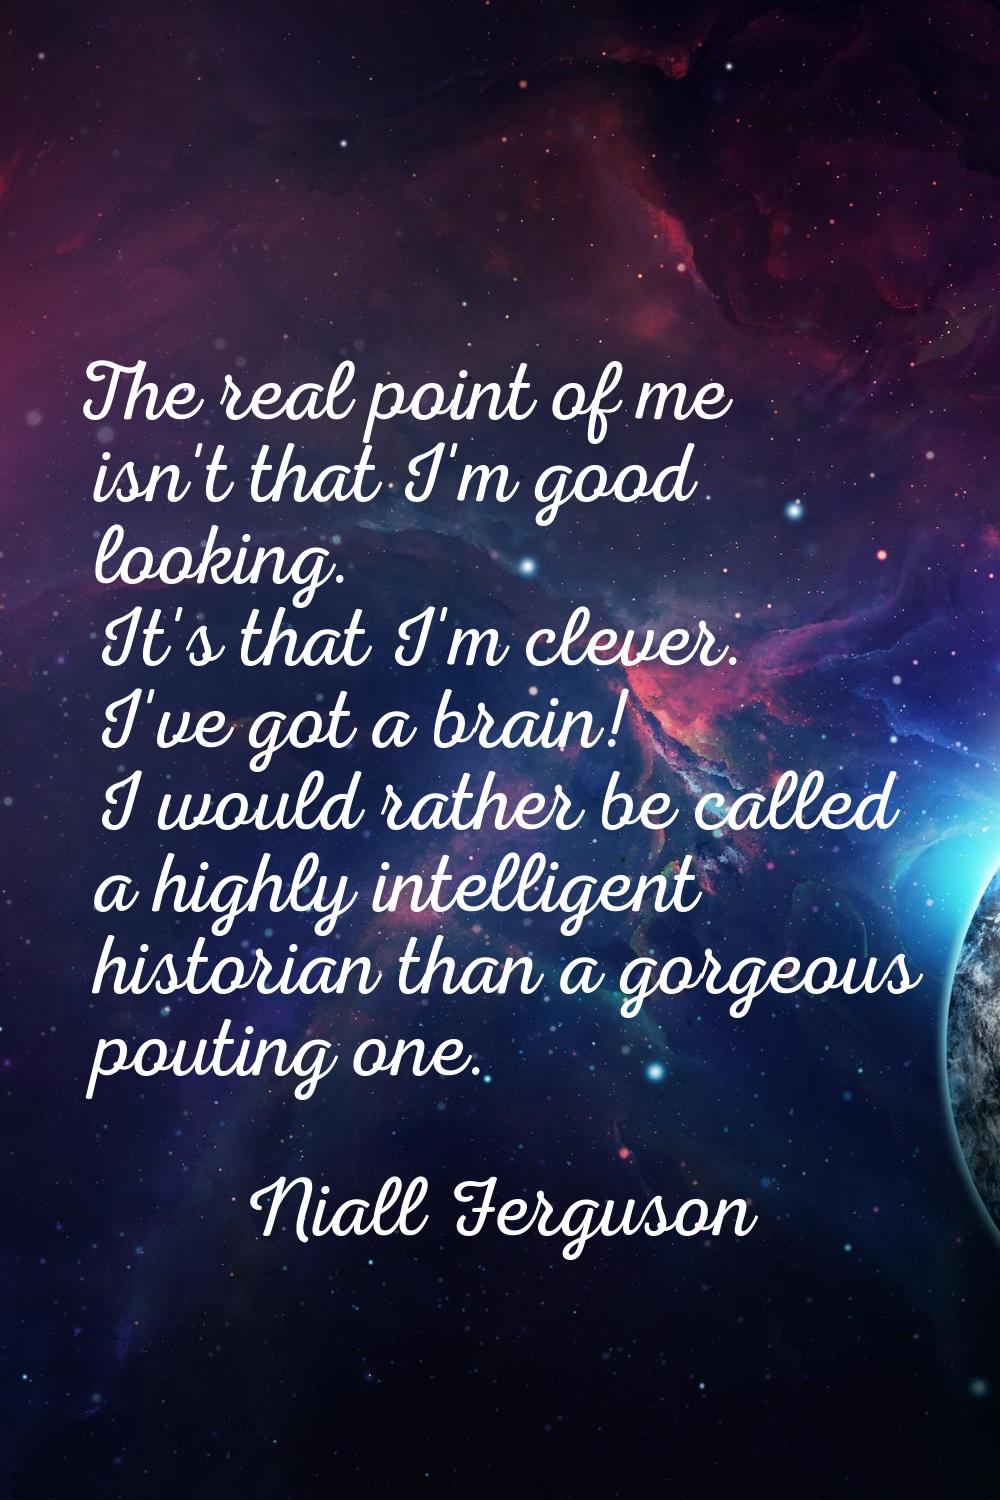 The real point of me isn't that I'm good looking. It's that I'm clever. I've got a brain! I would r